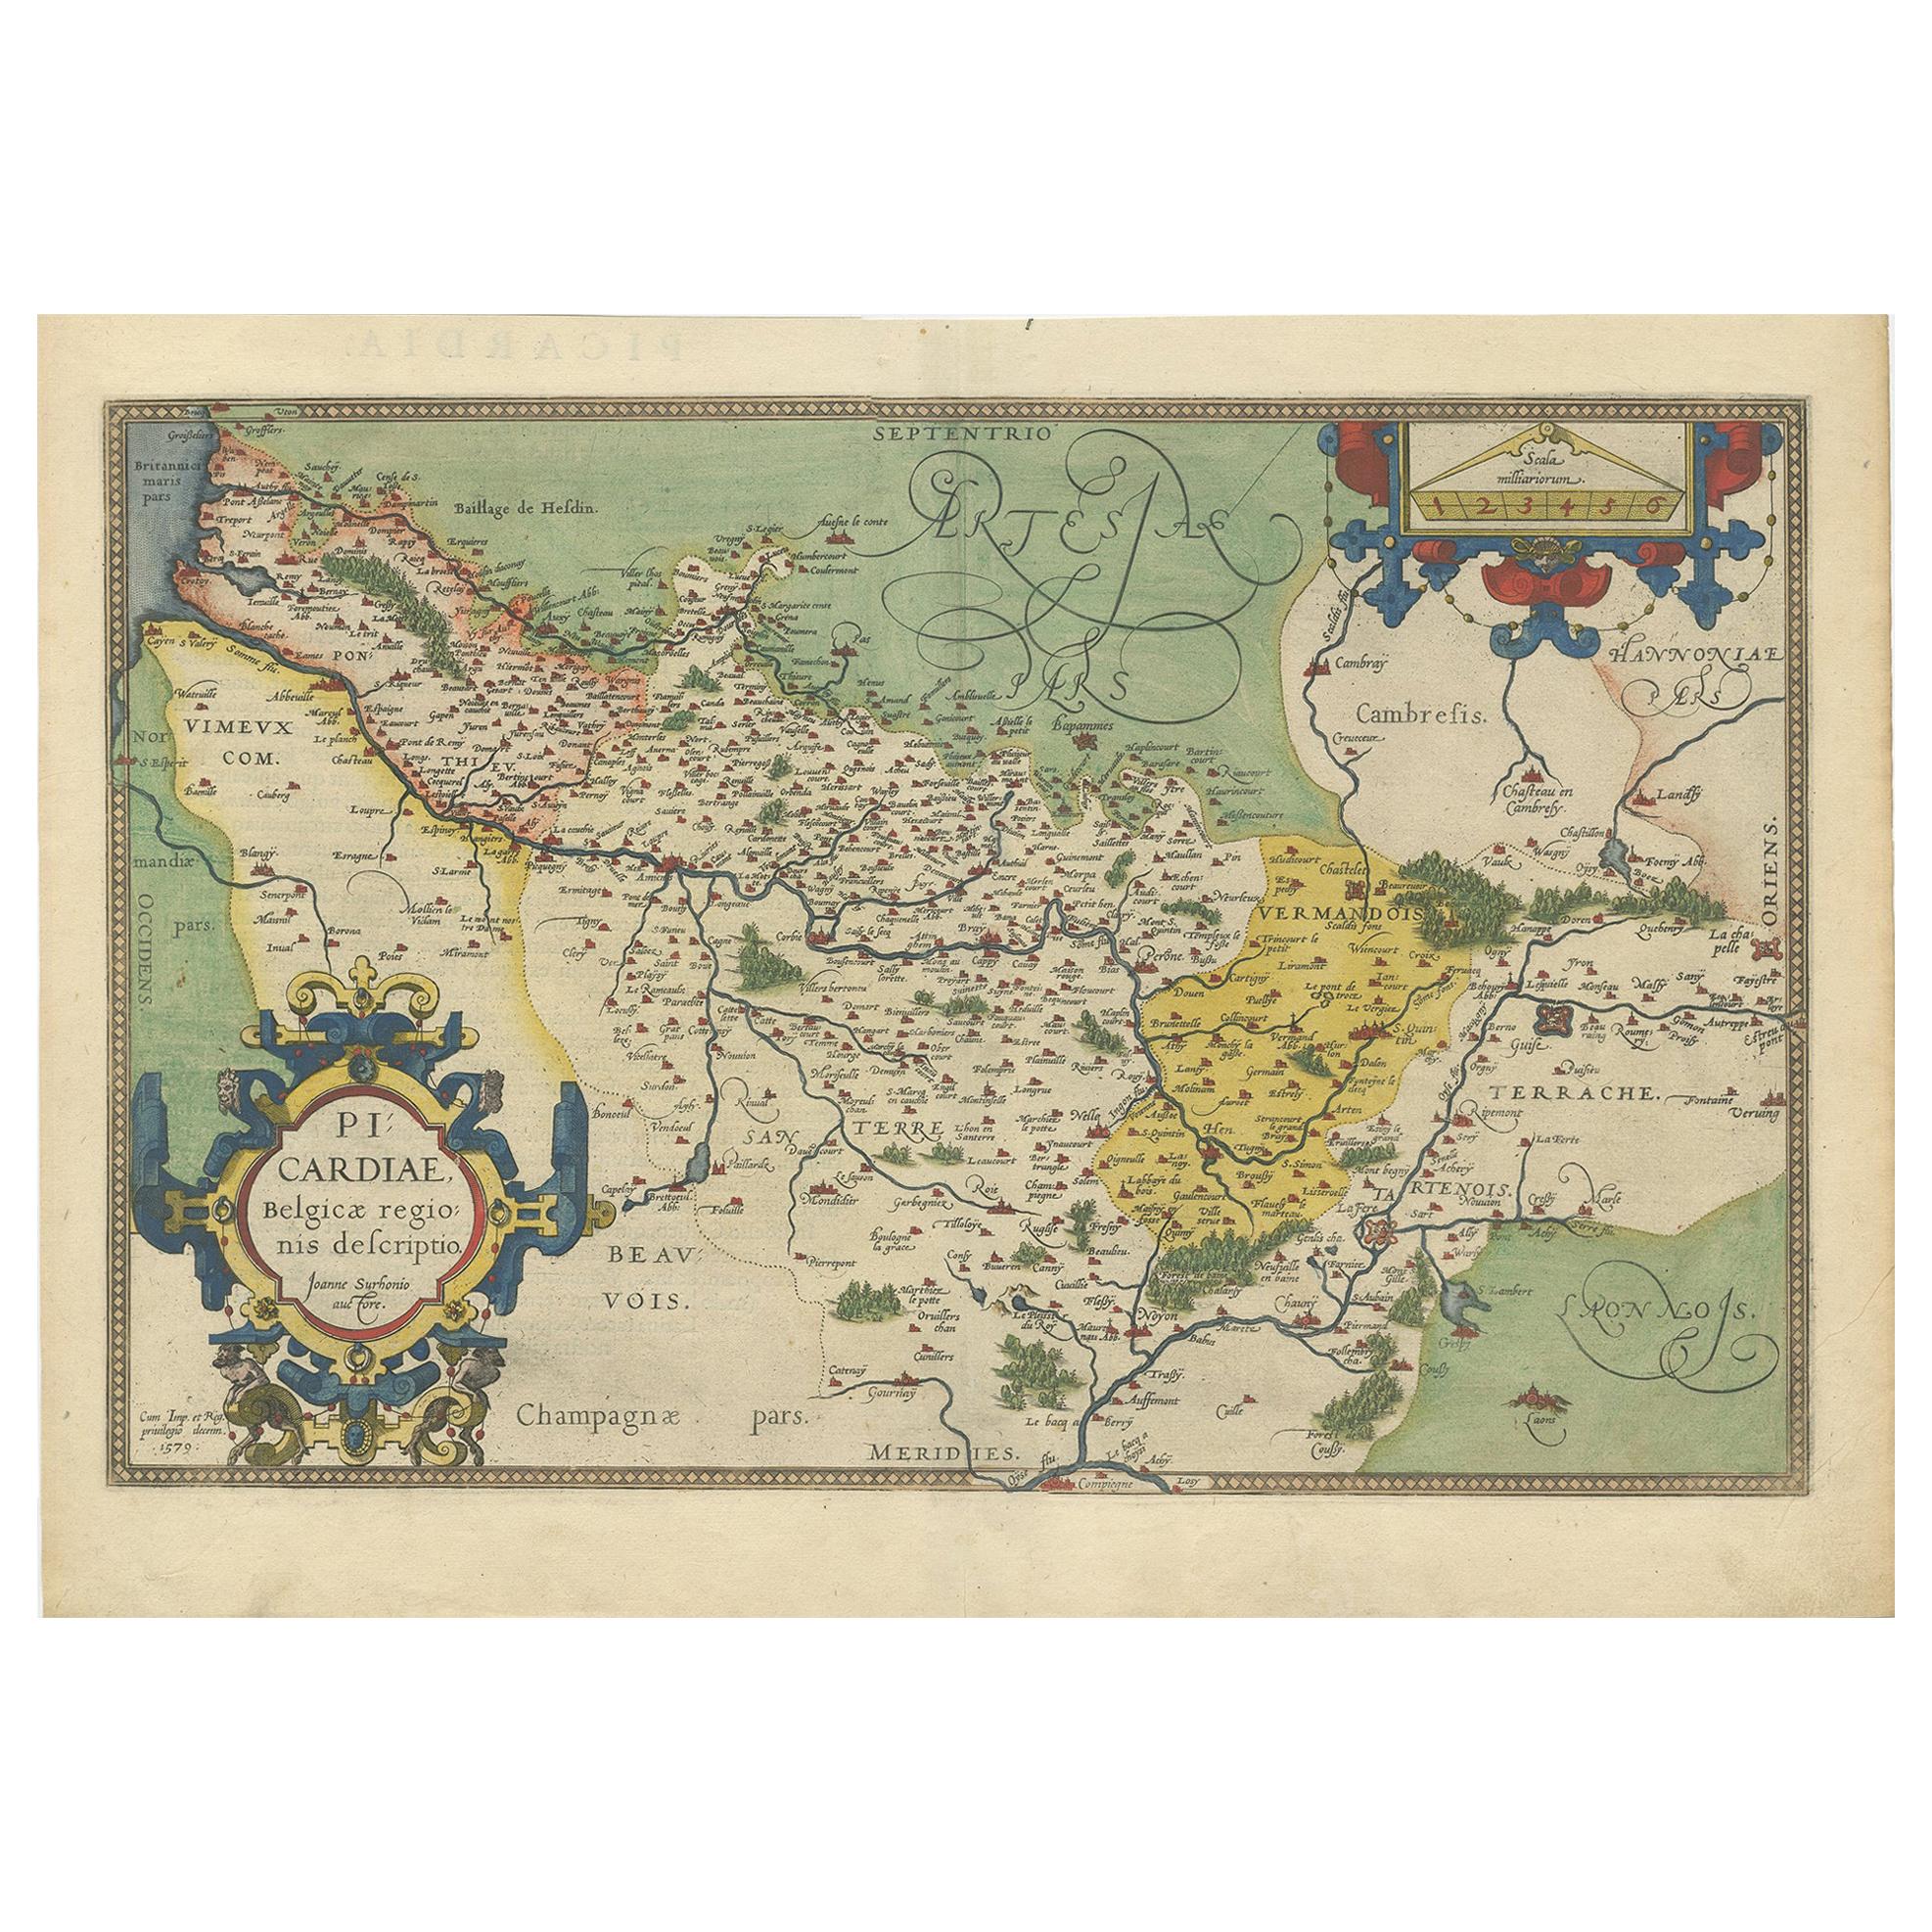 Antique Map of the Picardy Region of France by Ortelius, 'circa 1590'